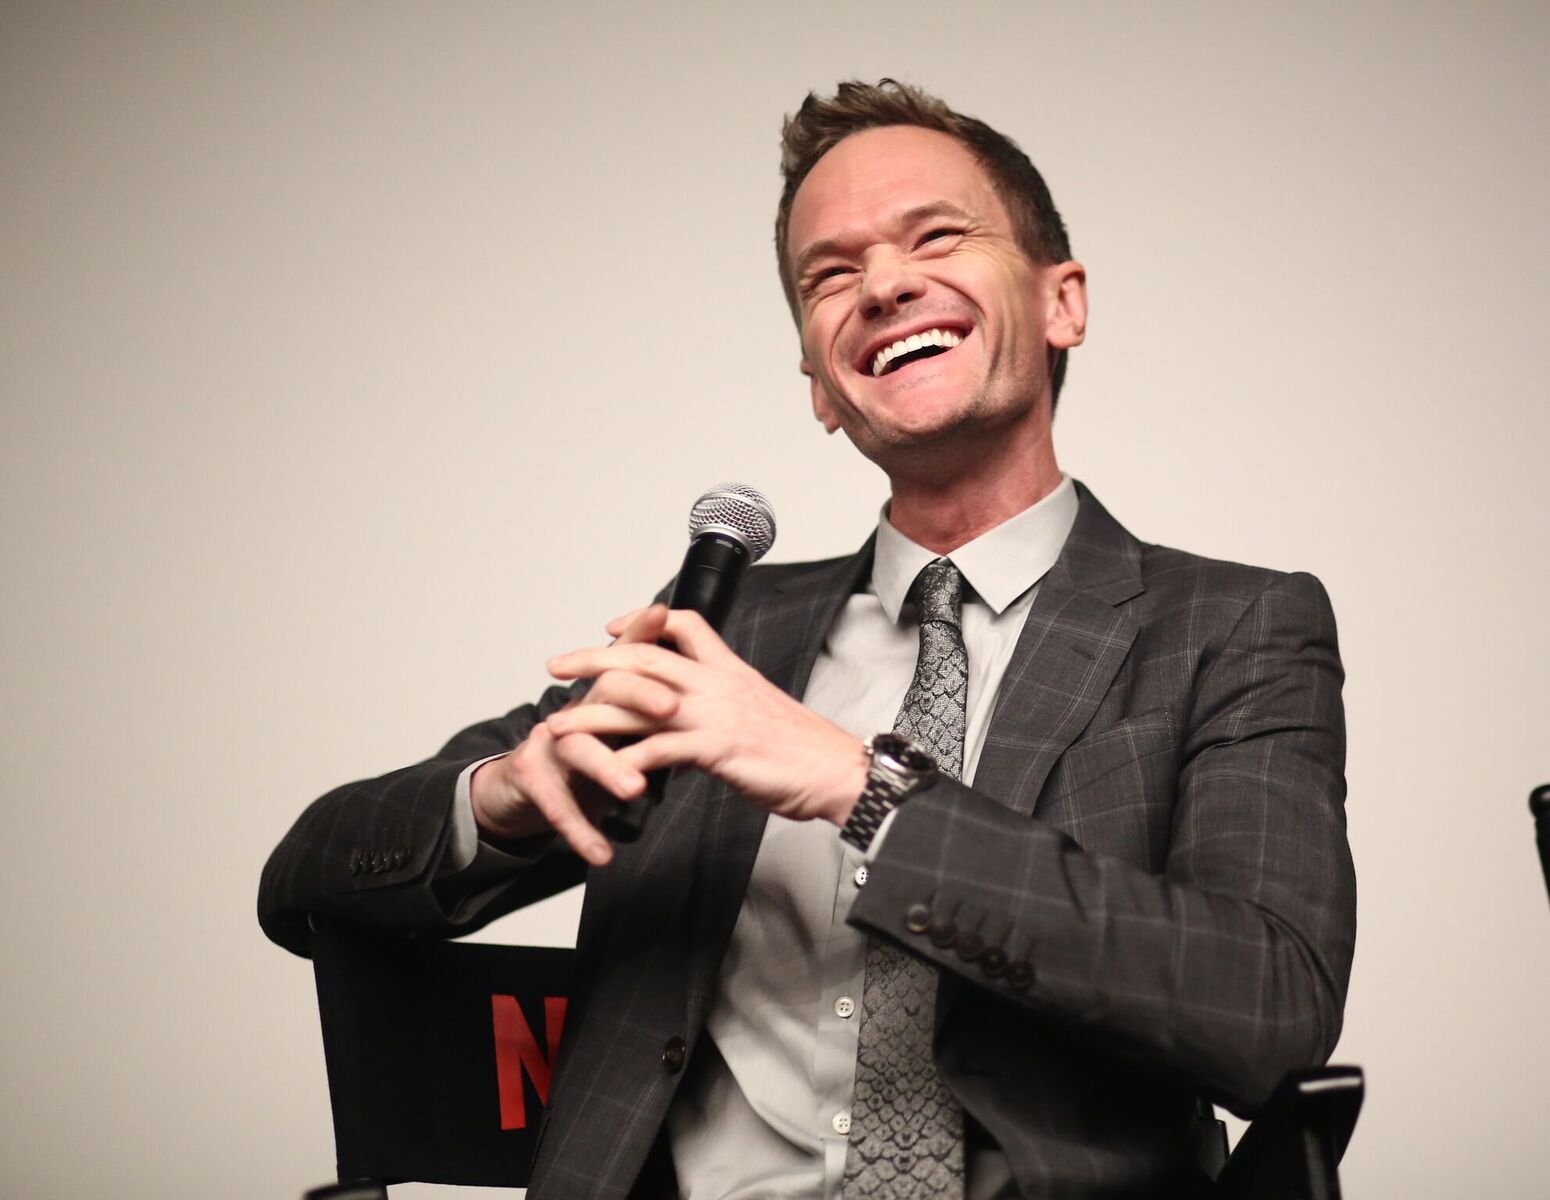 Neil Patrick Harris at Netflix's "A Series of Unfortunate Events" Red Carpet and Reception in 2019 | Photo: Getty Images